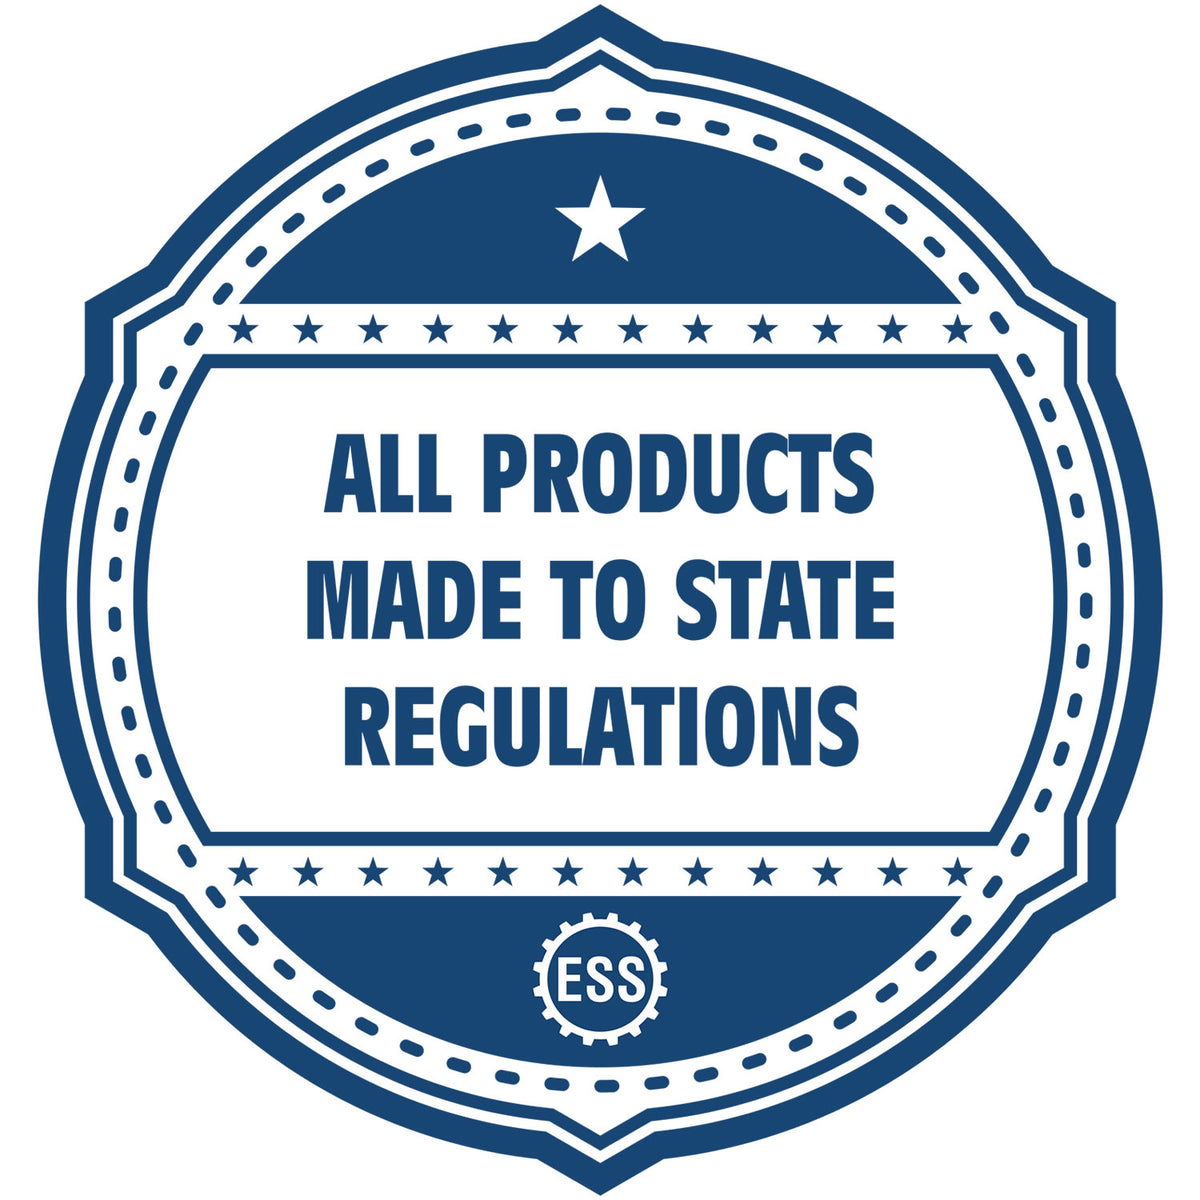 A blue icon or badge for the Slim Pre-Inked Wyoming Professional Geologist Seal Stamp showing that this product is made in compliance with state regulations.